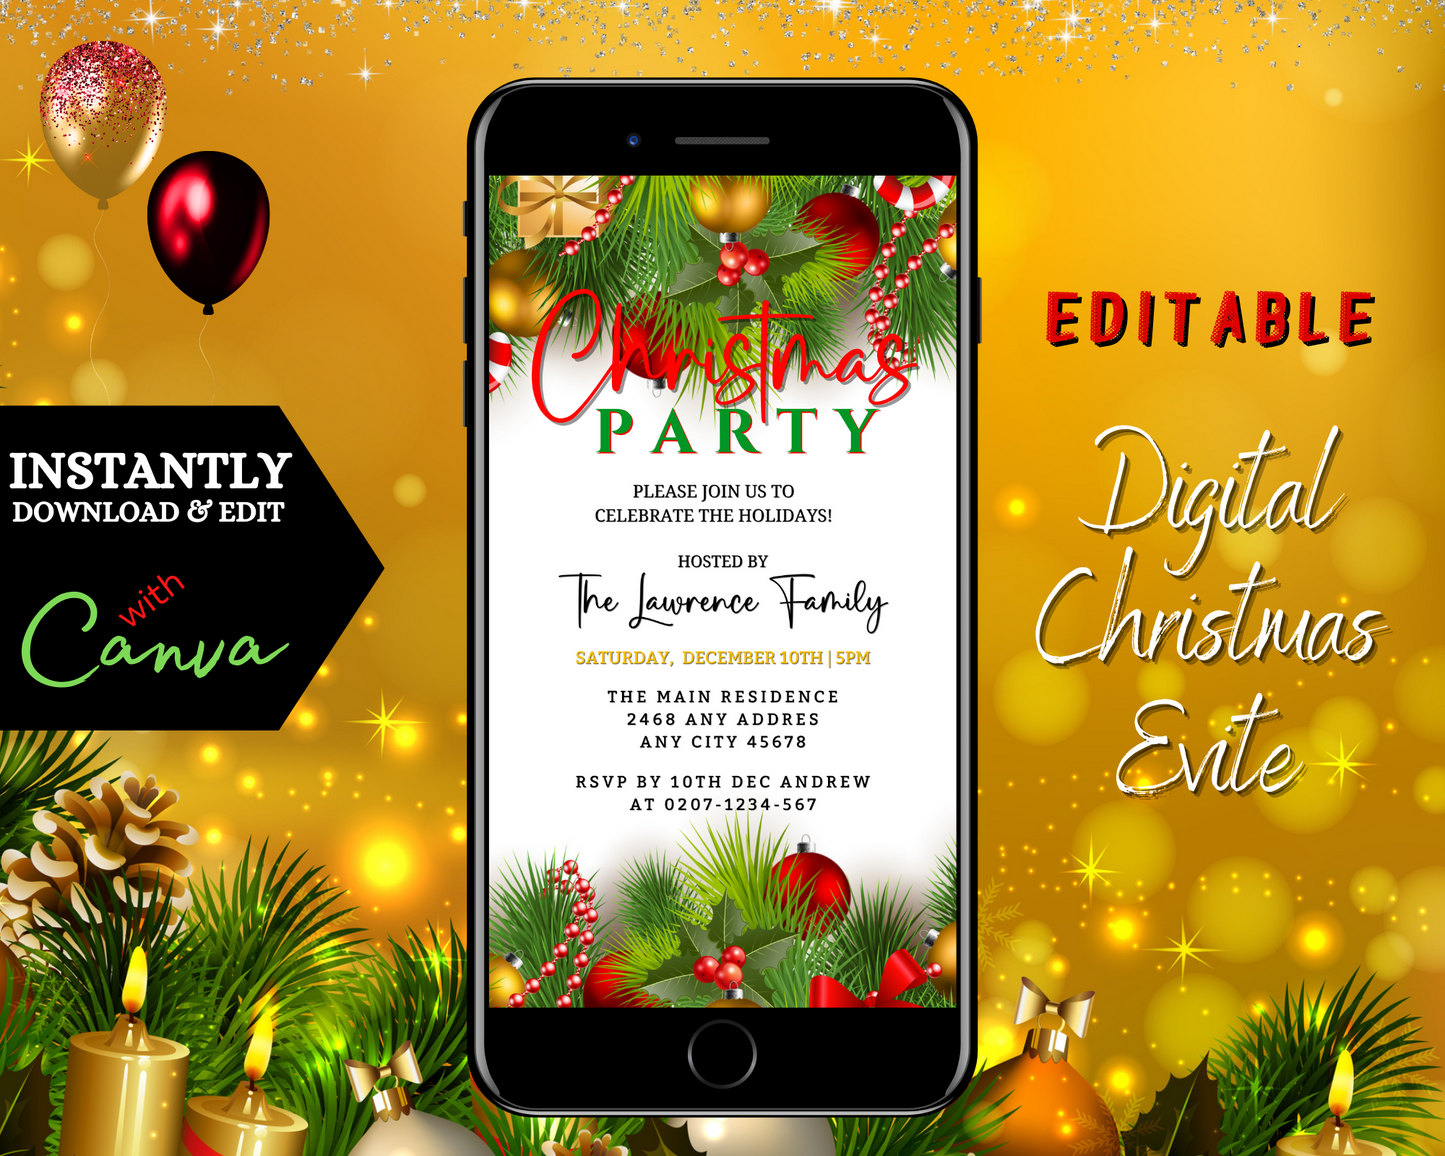 Editable digital Christmas party invitation displayed on a smartphone screen with green ornaments and text, customizable using Canva.